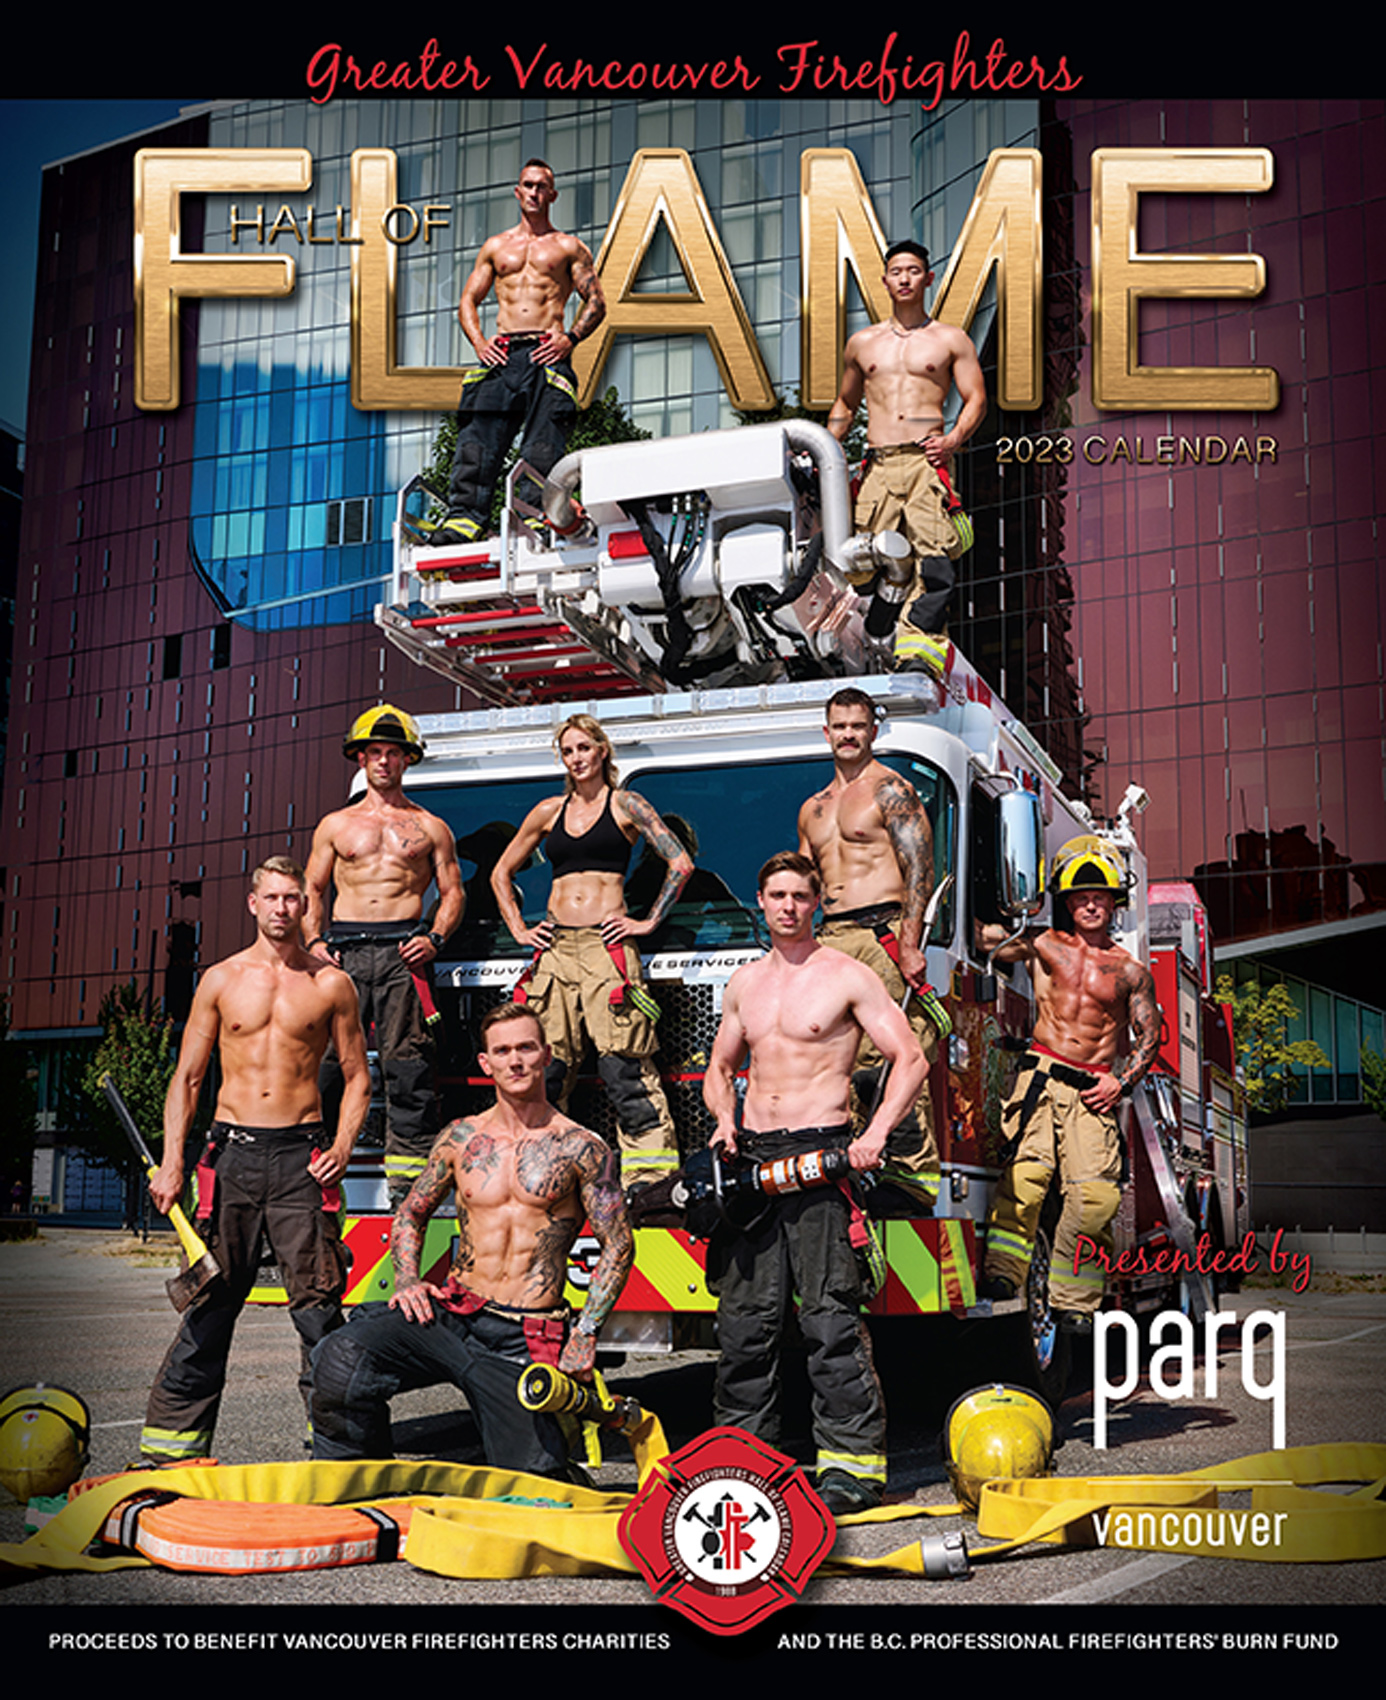 HOF-Hall-of-Flame-Calendar-Erich-Saide-Vancouver-Portrait-Photographer-Firefighters-First-Responders-Hot-Hero-2023HOFCALENDARCOVER